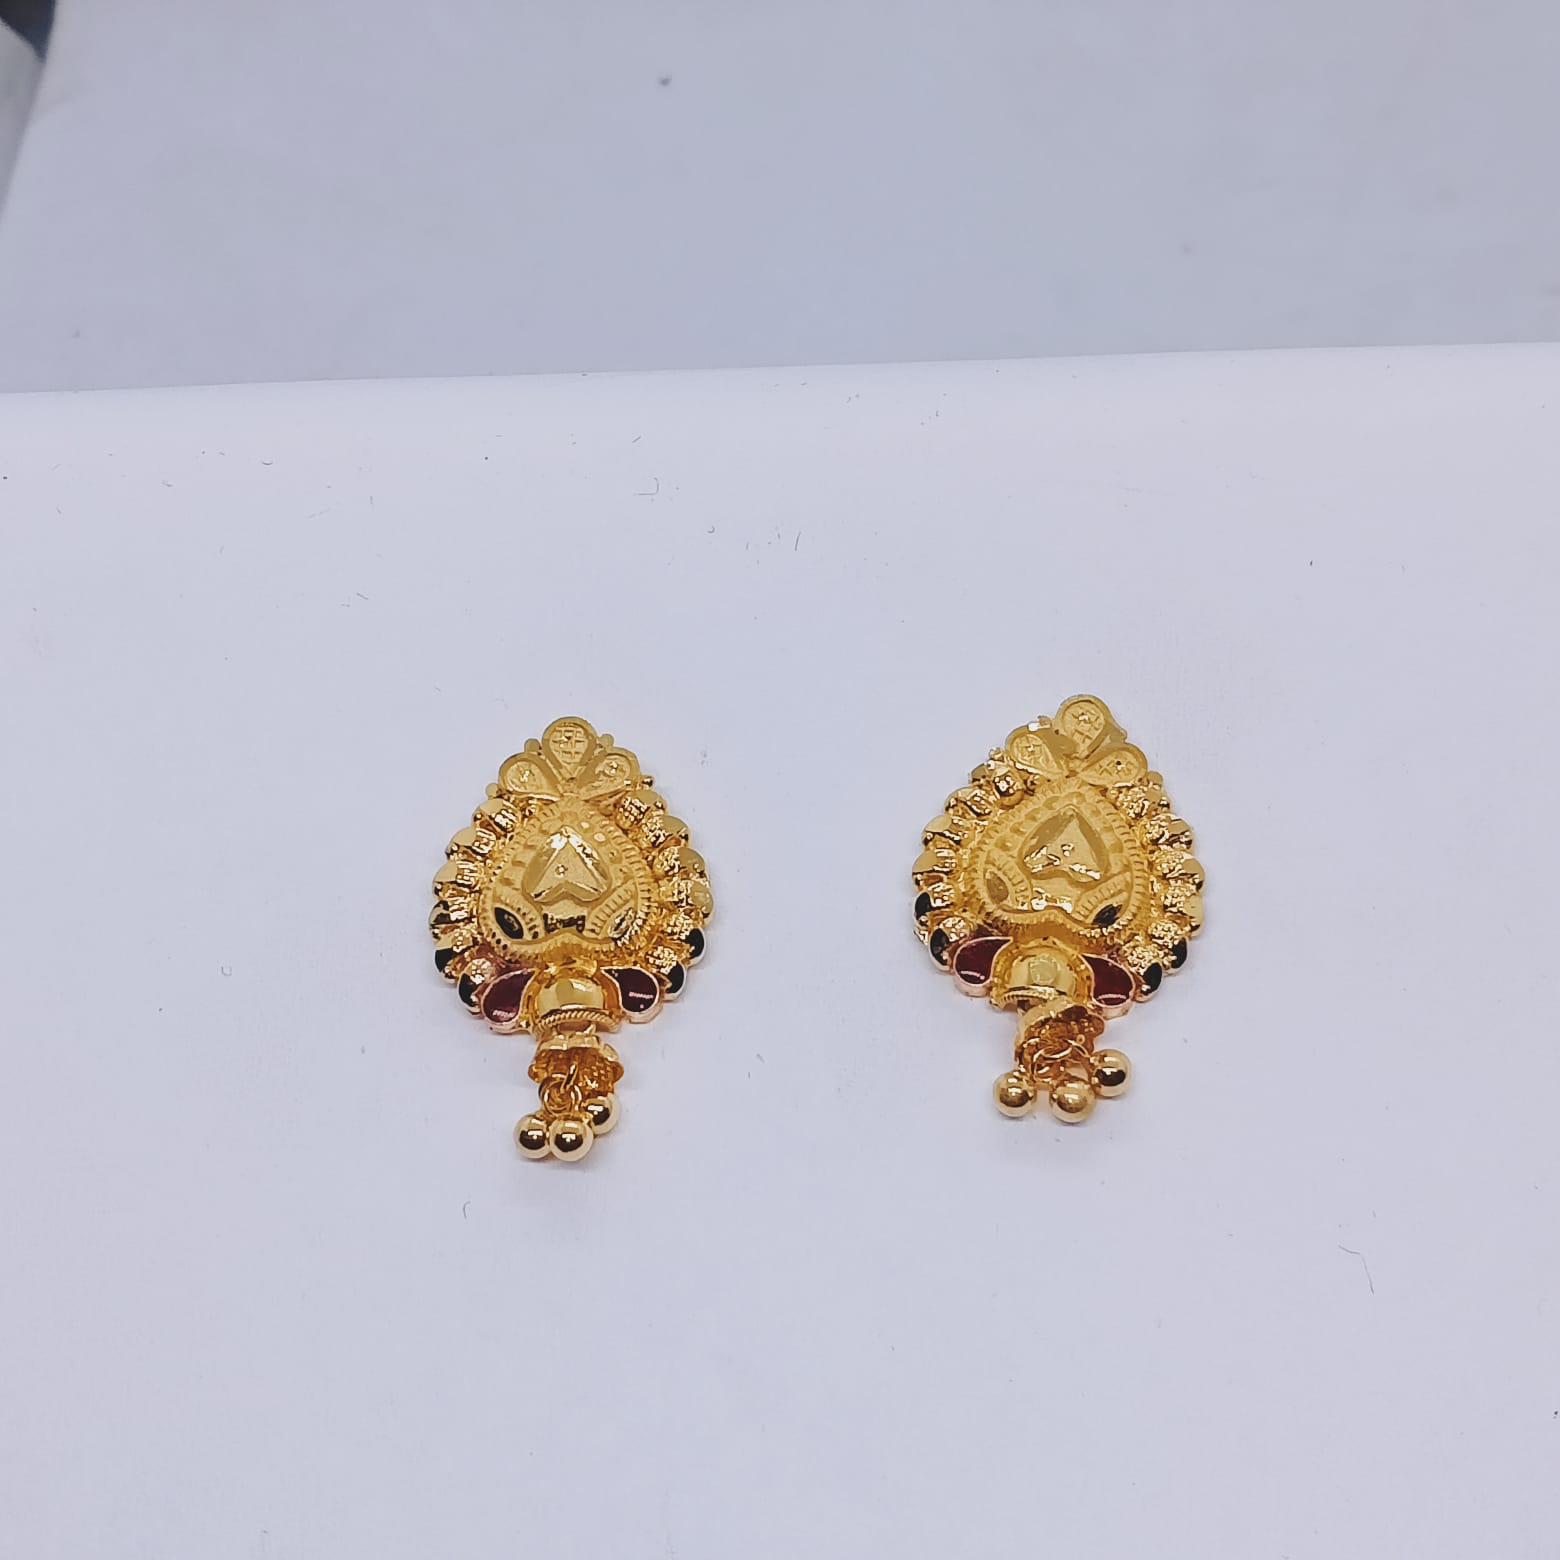 Gold earrings designs, below 2and 4 grams gold earrings with weight and price